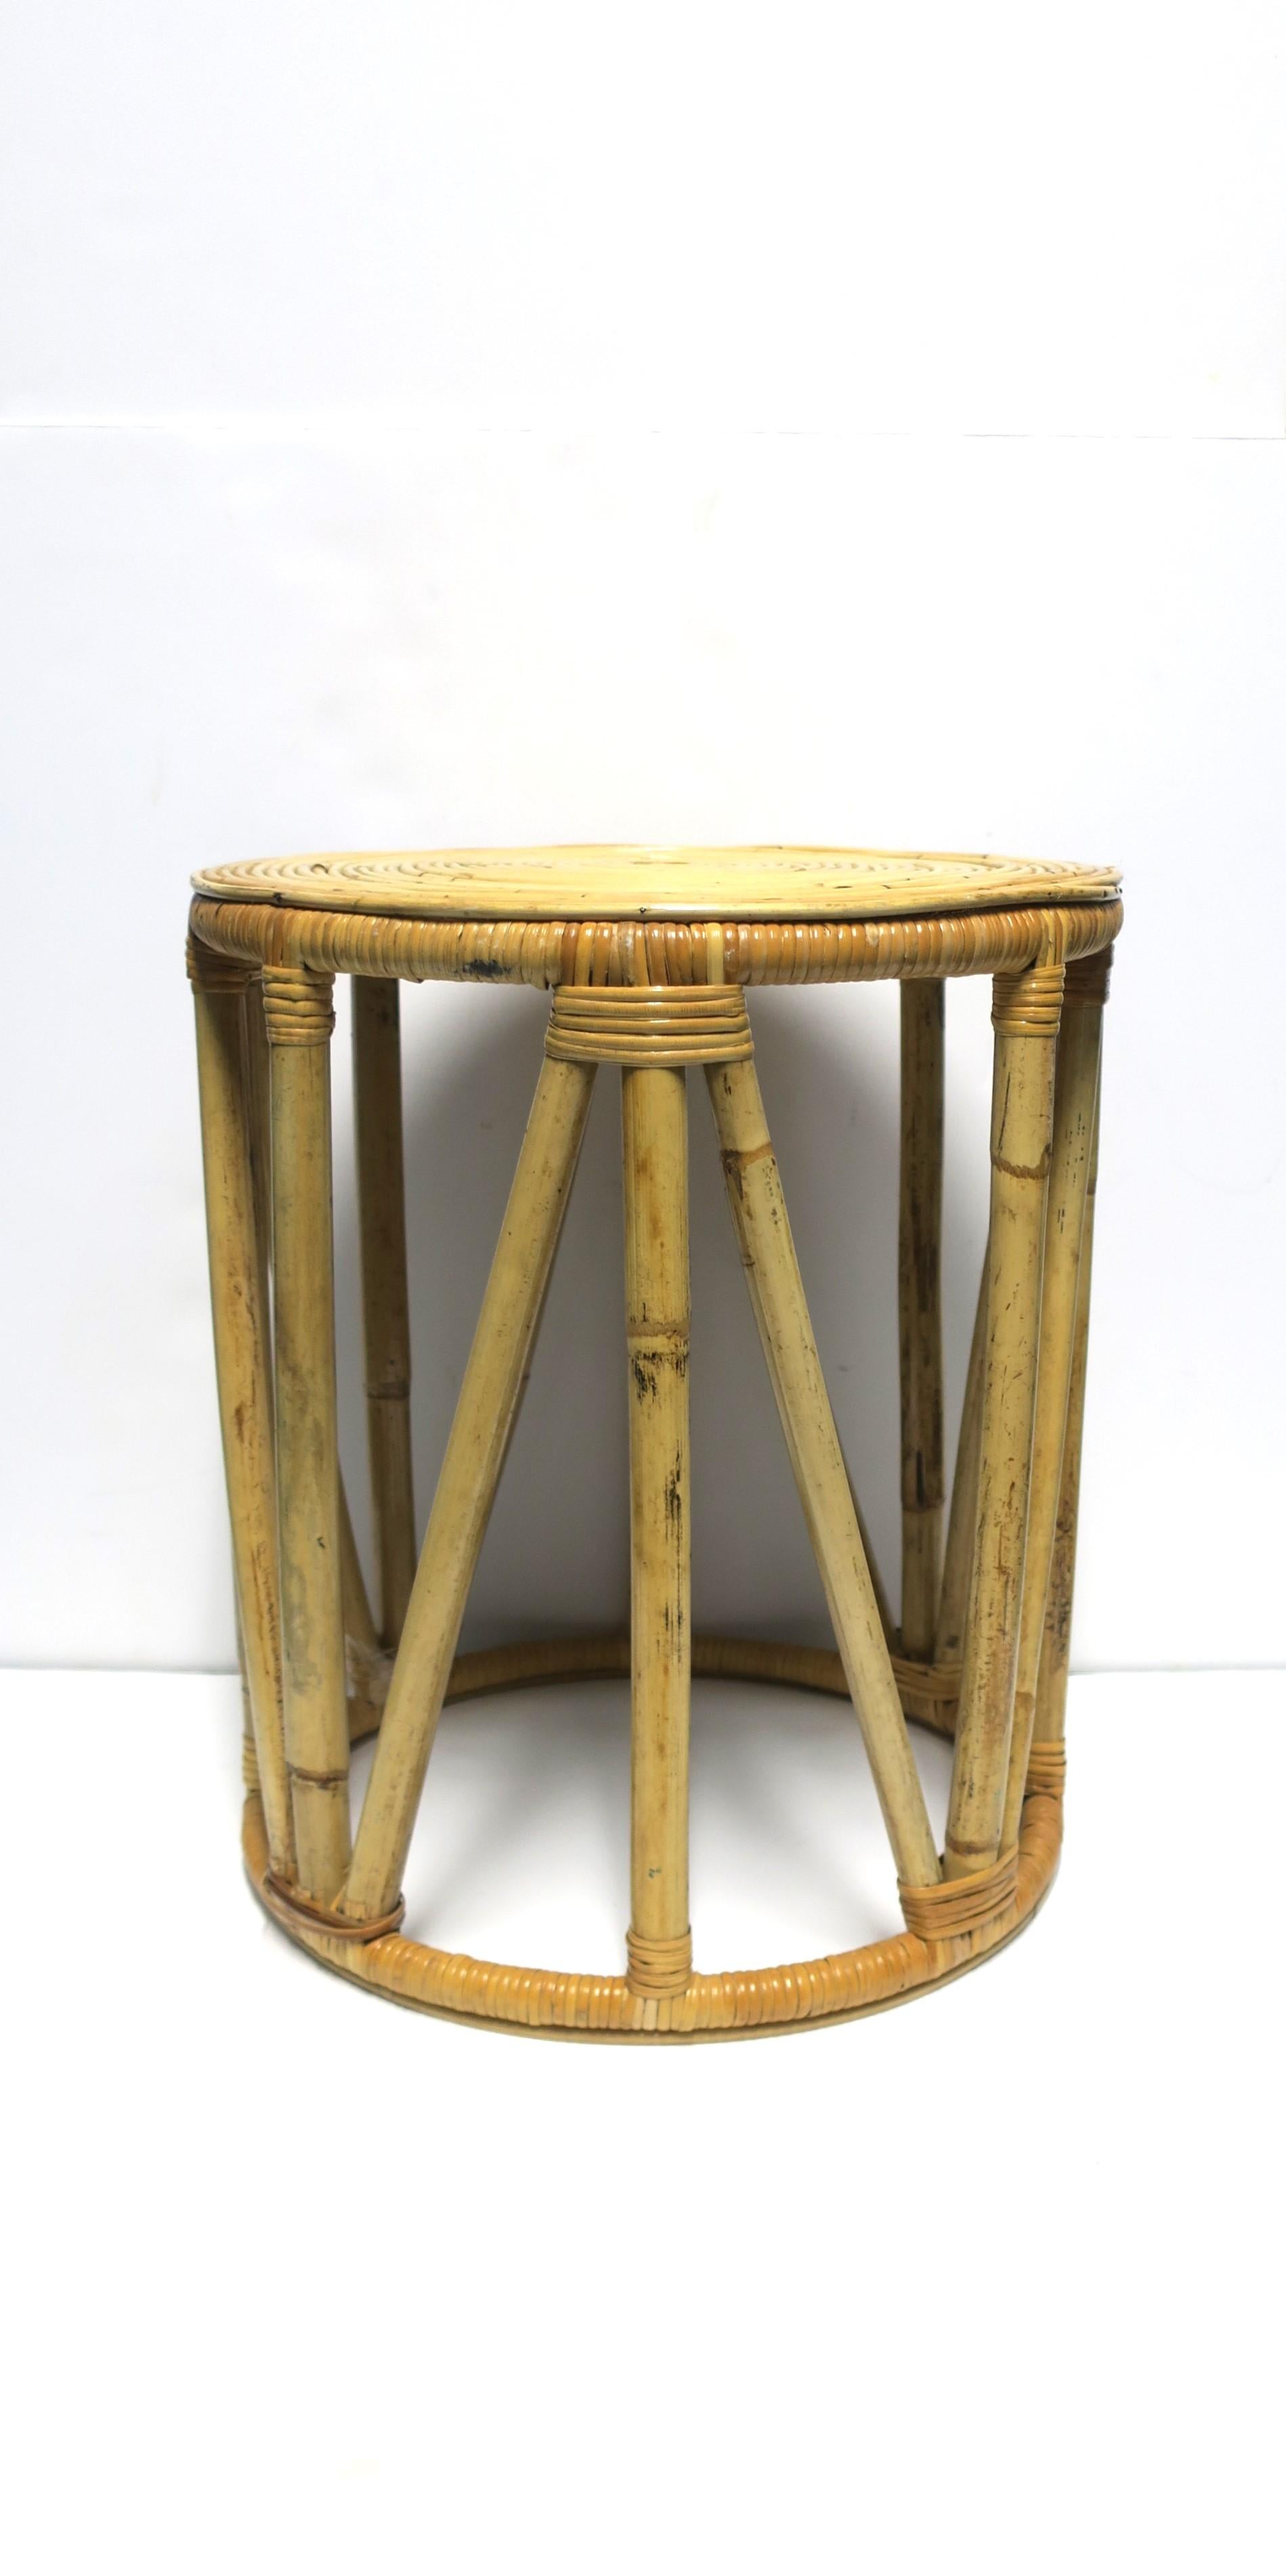 Wicker Bamboo Side Drinks Table or Stool 8